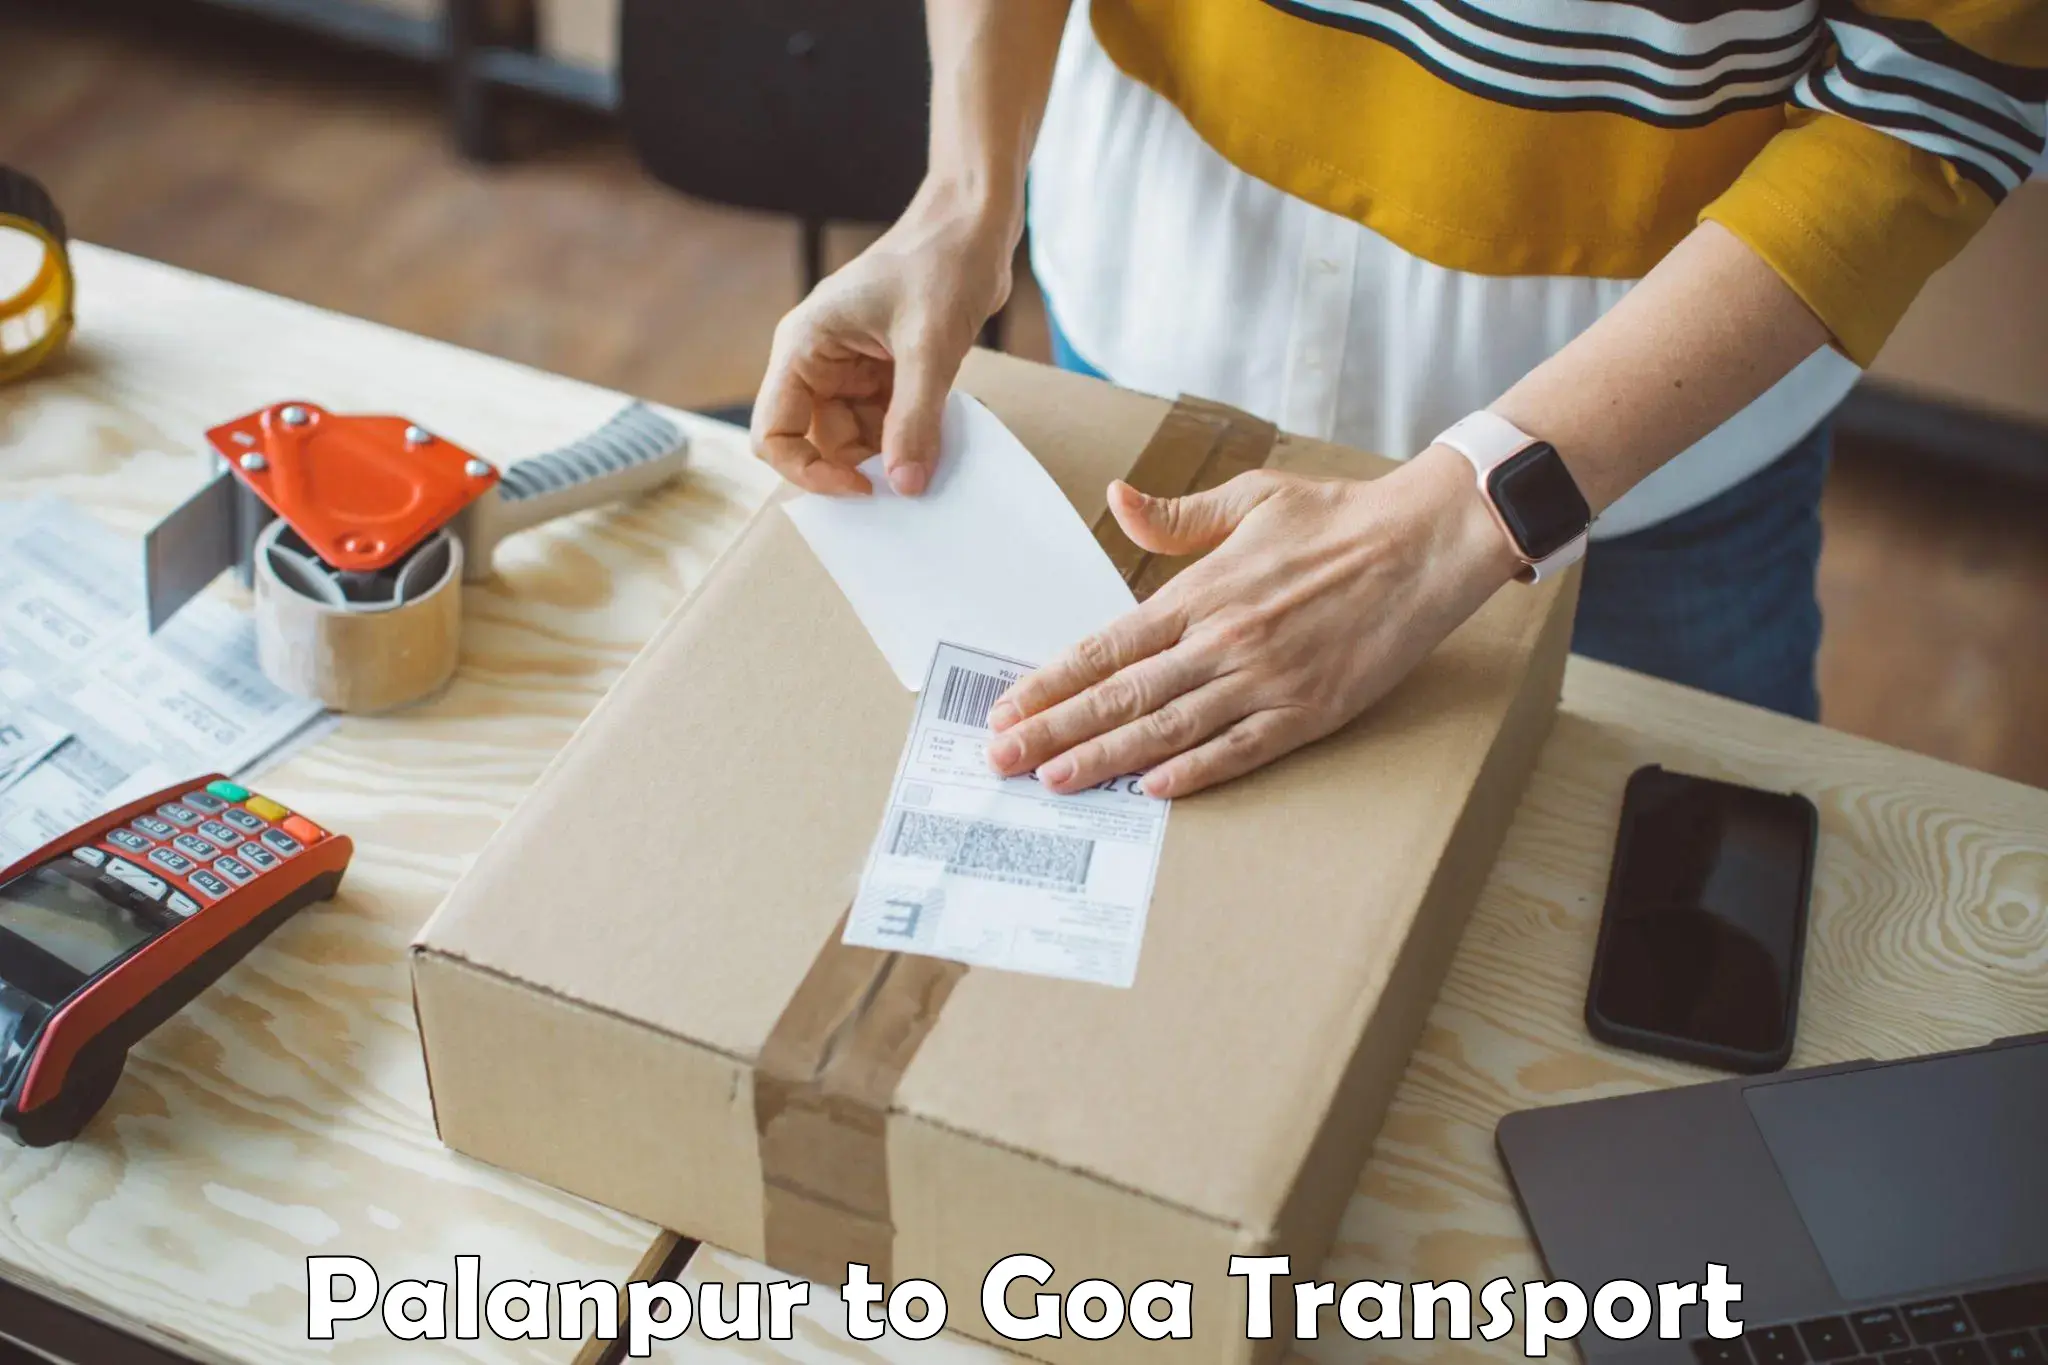 Online transport booking Palanpur to Bardez